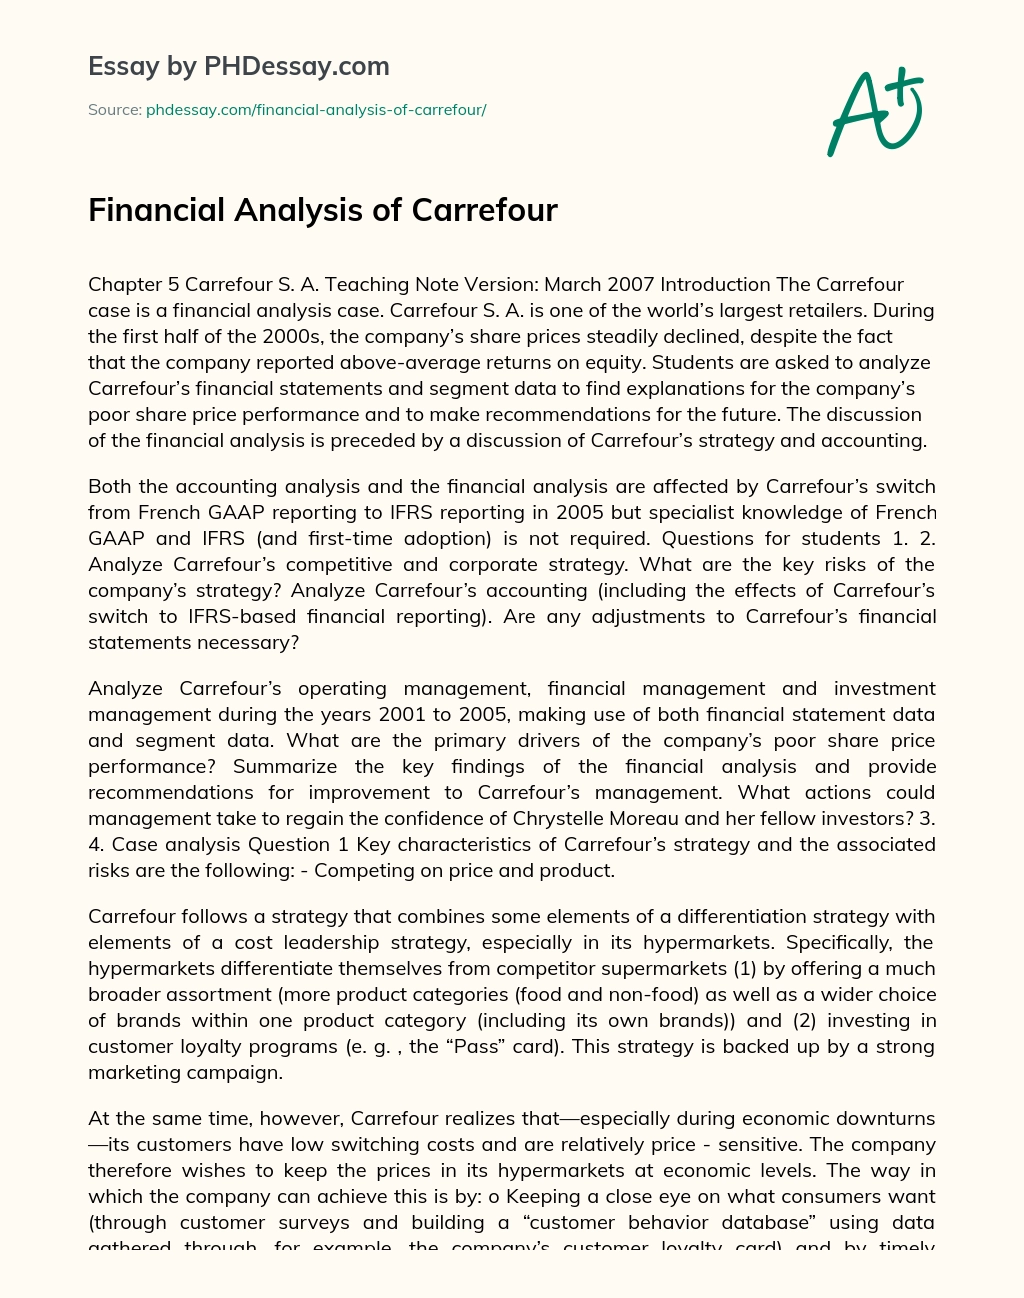 financial analysis of carrefour phdessay com fiserv statements